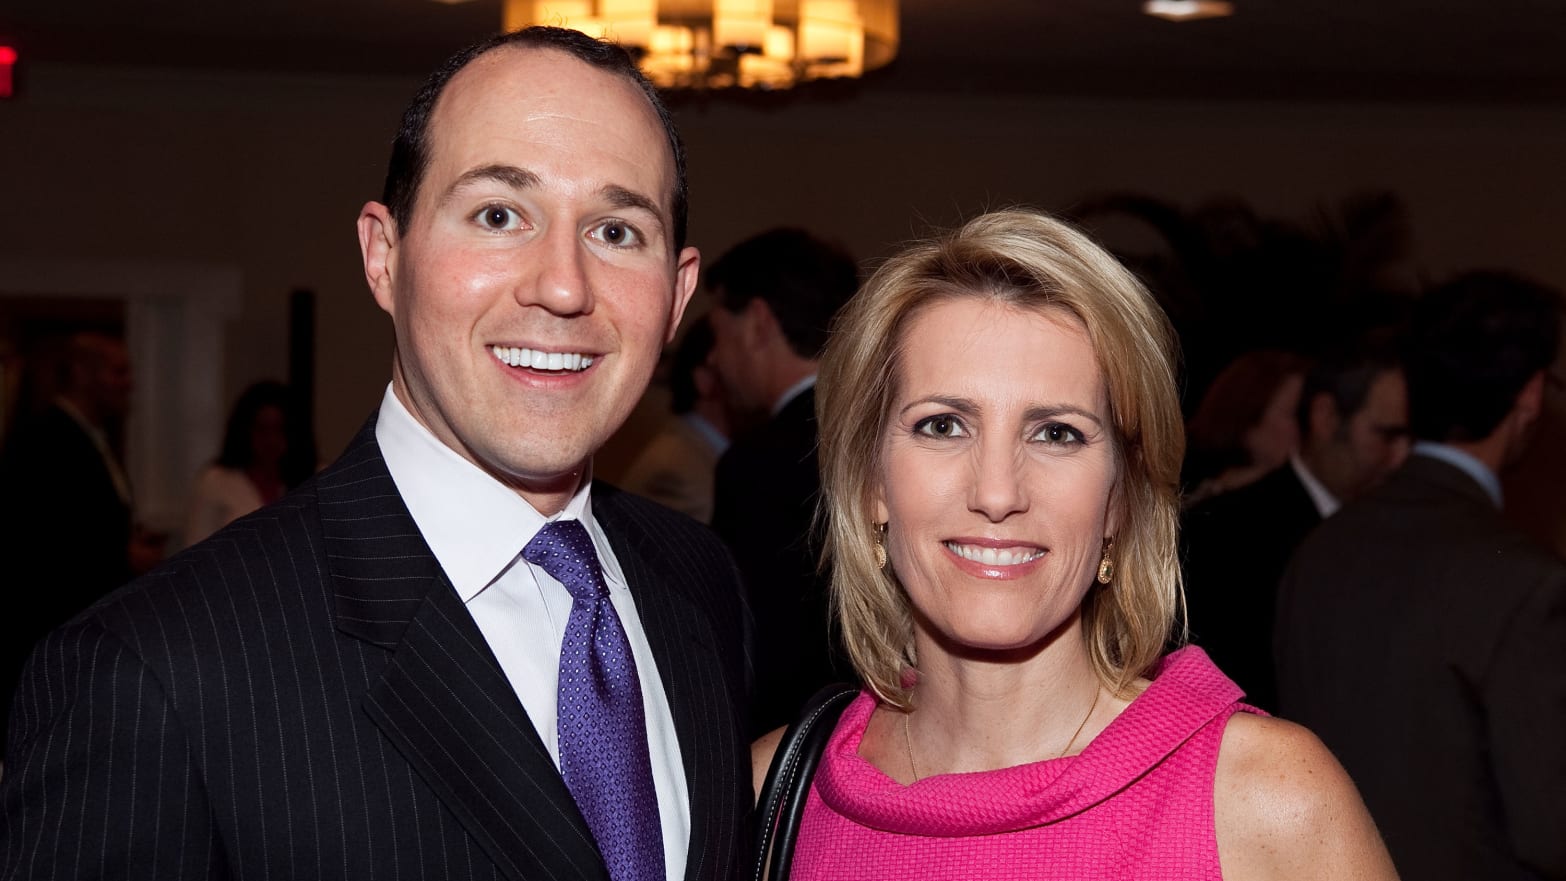 Raymond Arroyo and Laura Ingraham pose for a photo together in 2010.